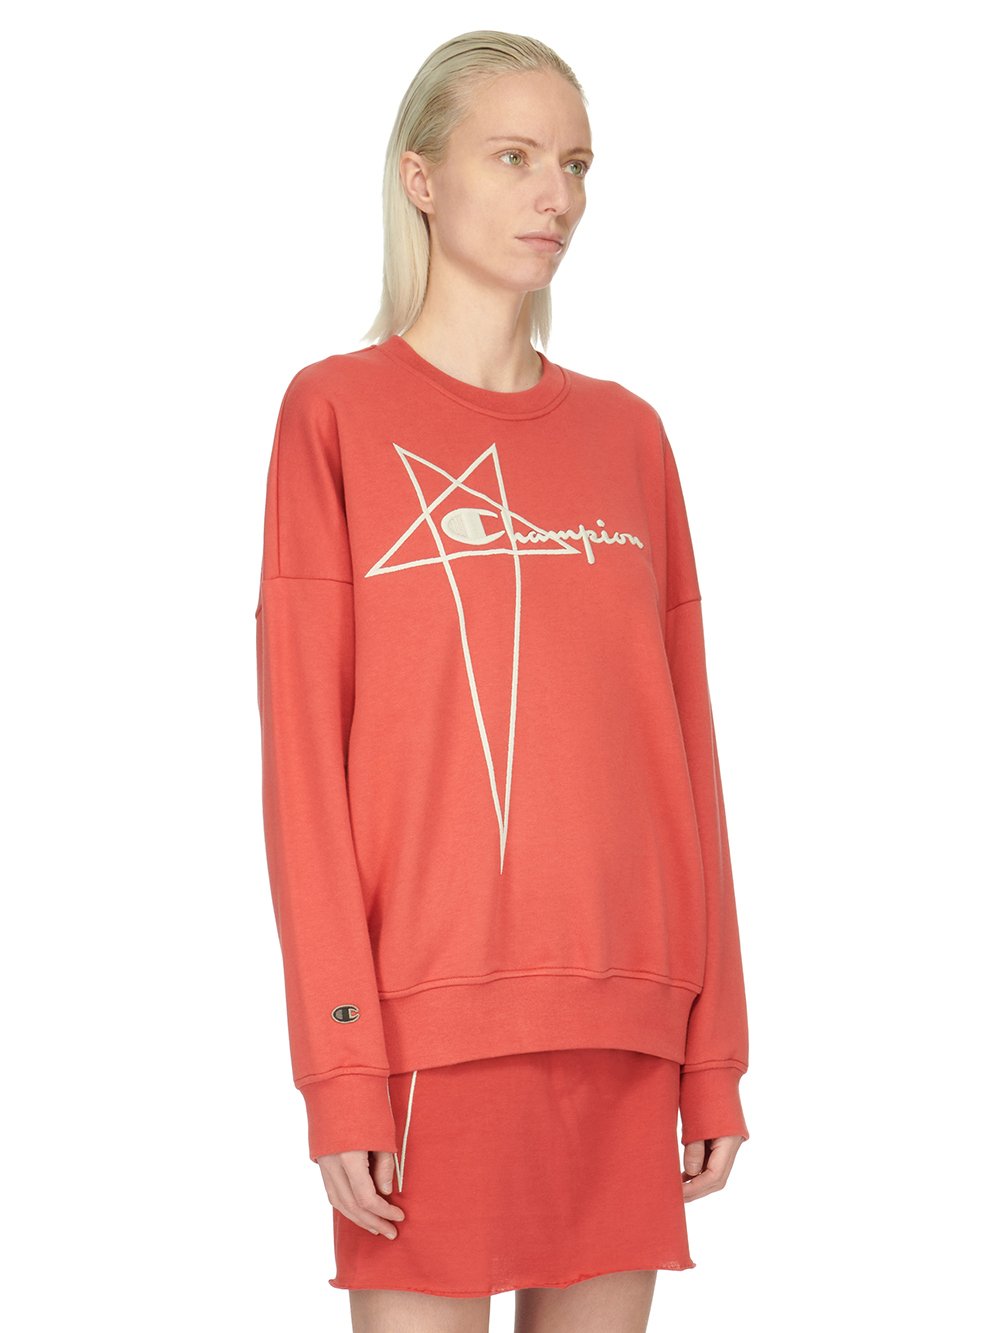 CHAMPION X RICK OWENS PULLOVER SWEAT IN CARNELIAN RED COMPACT COTTON FELPA